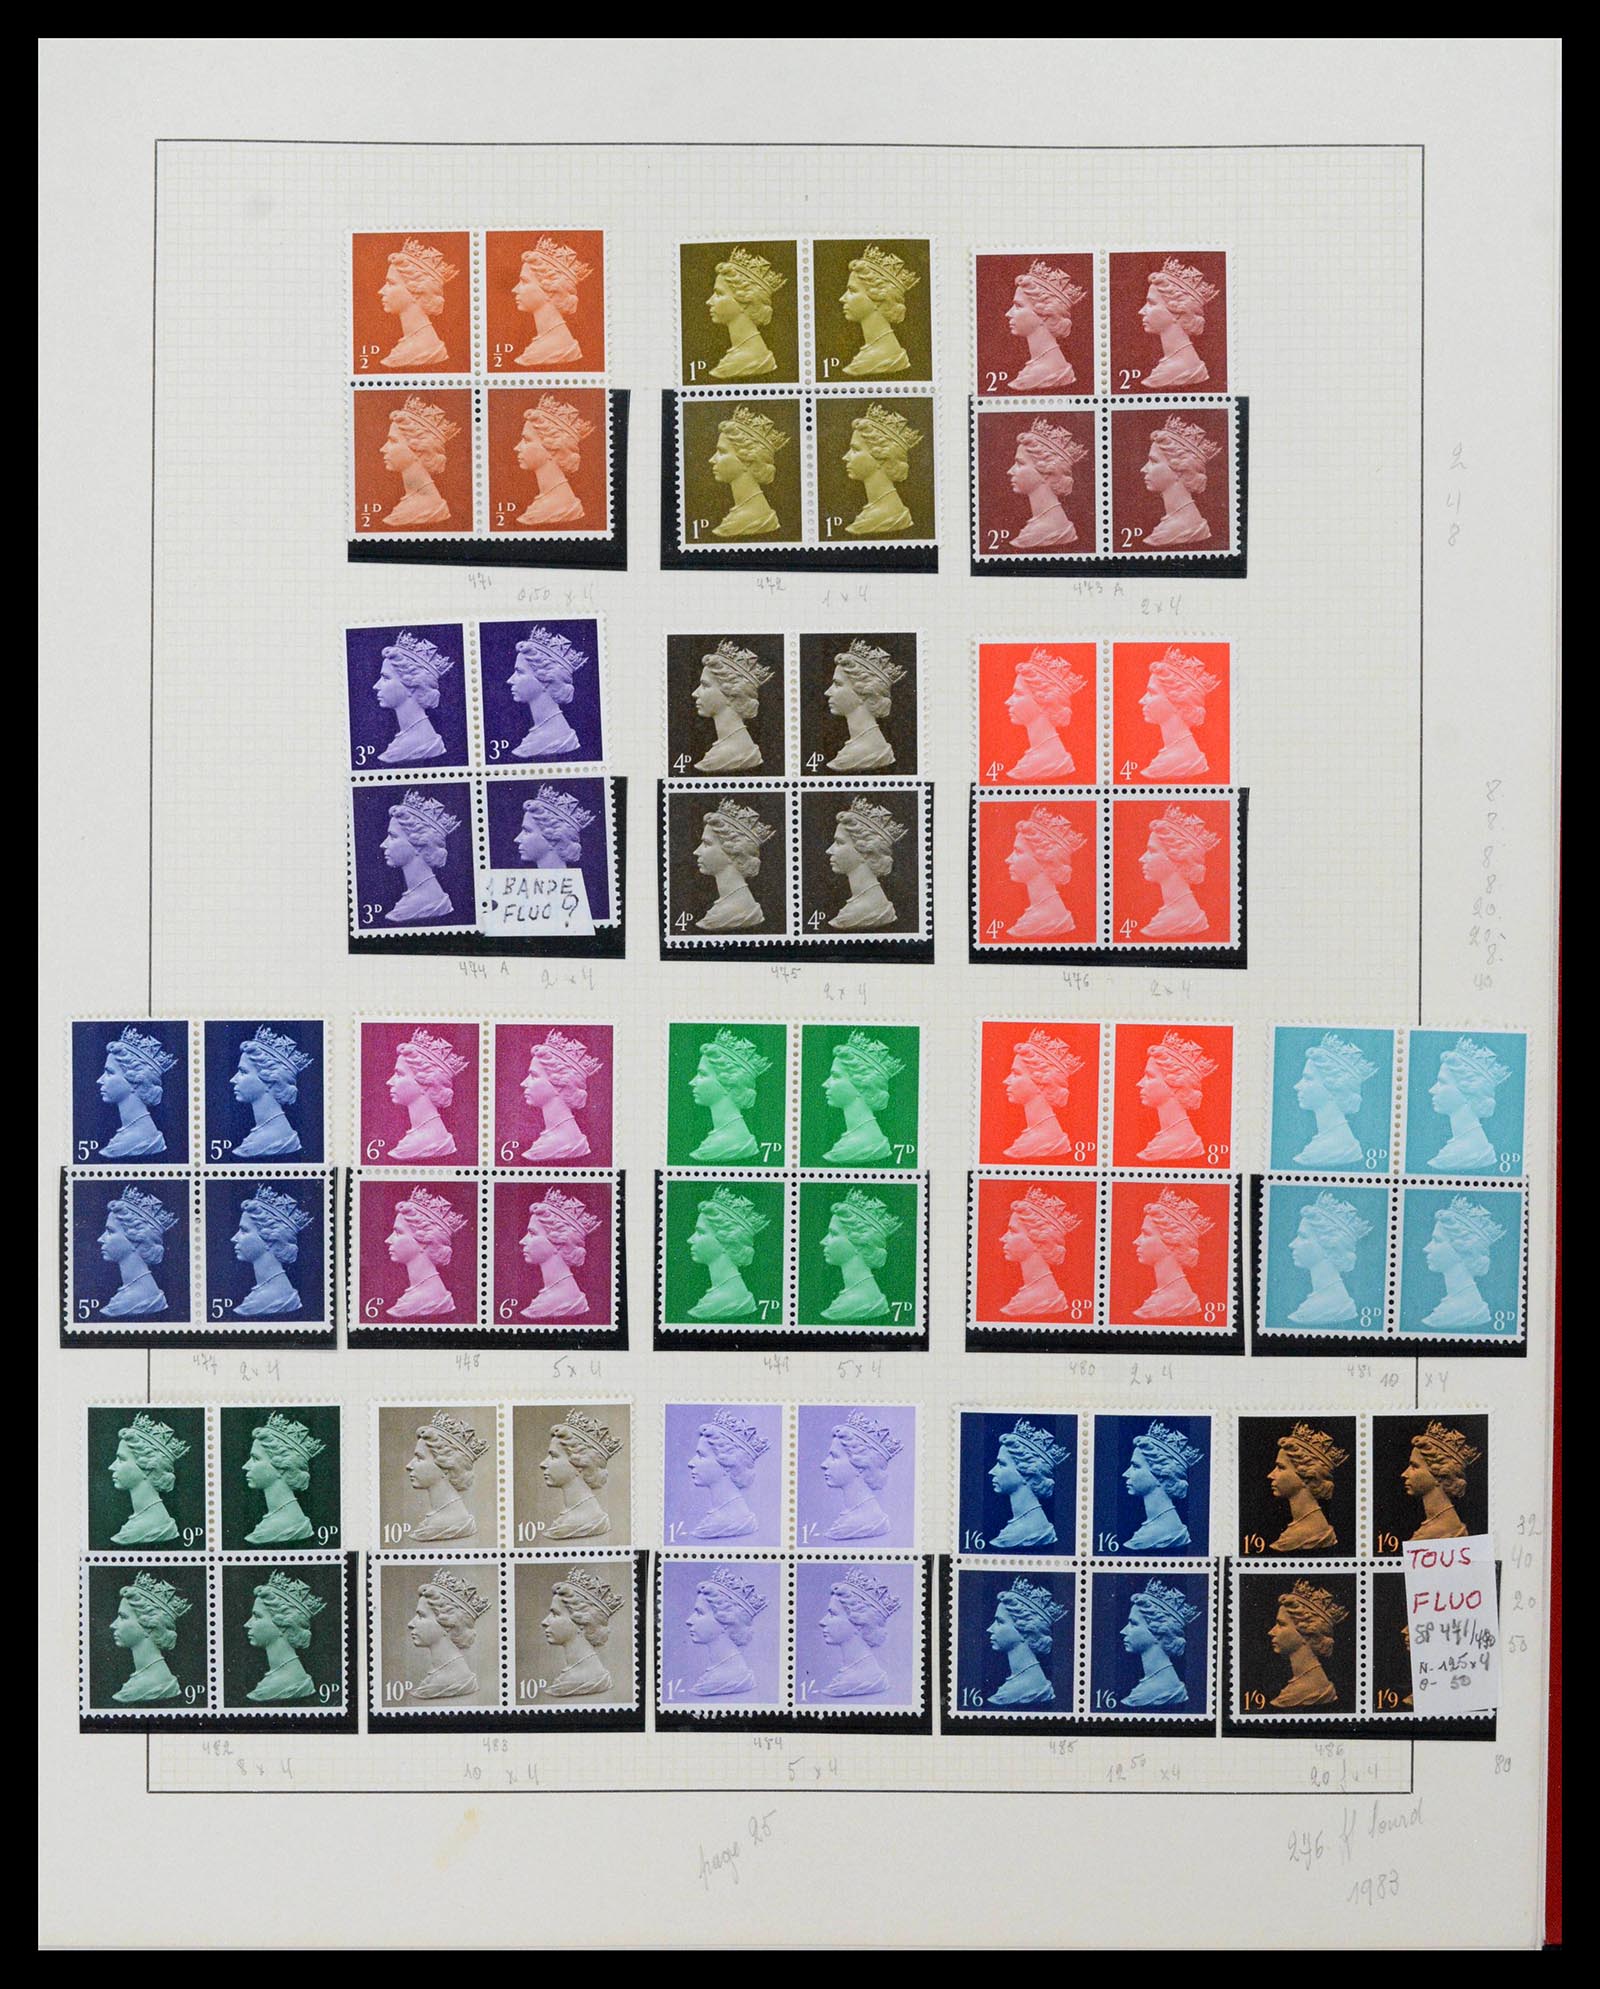 39033 0084 - Stamp collection 39033 Great Britain 1912-1981.